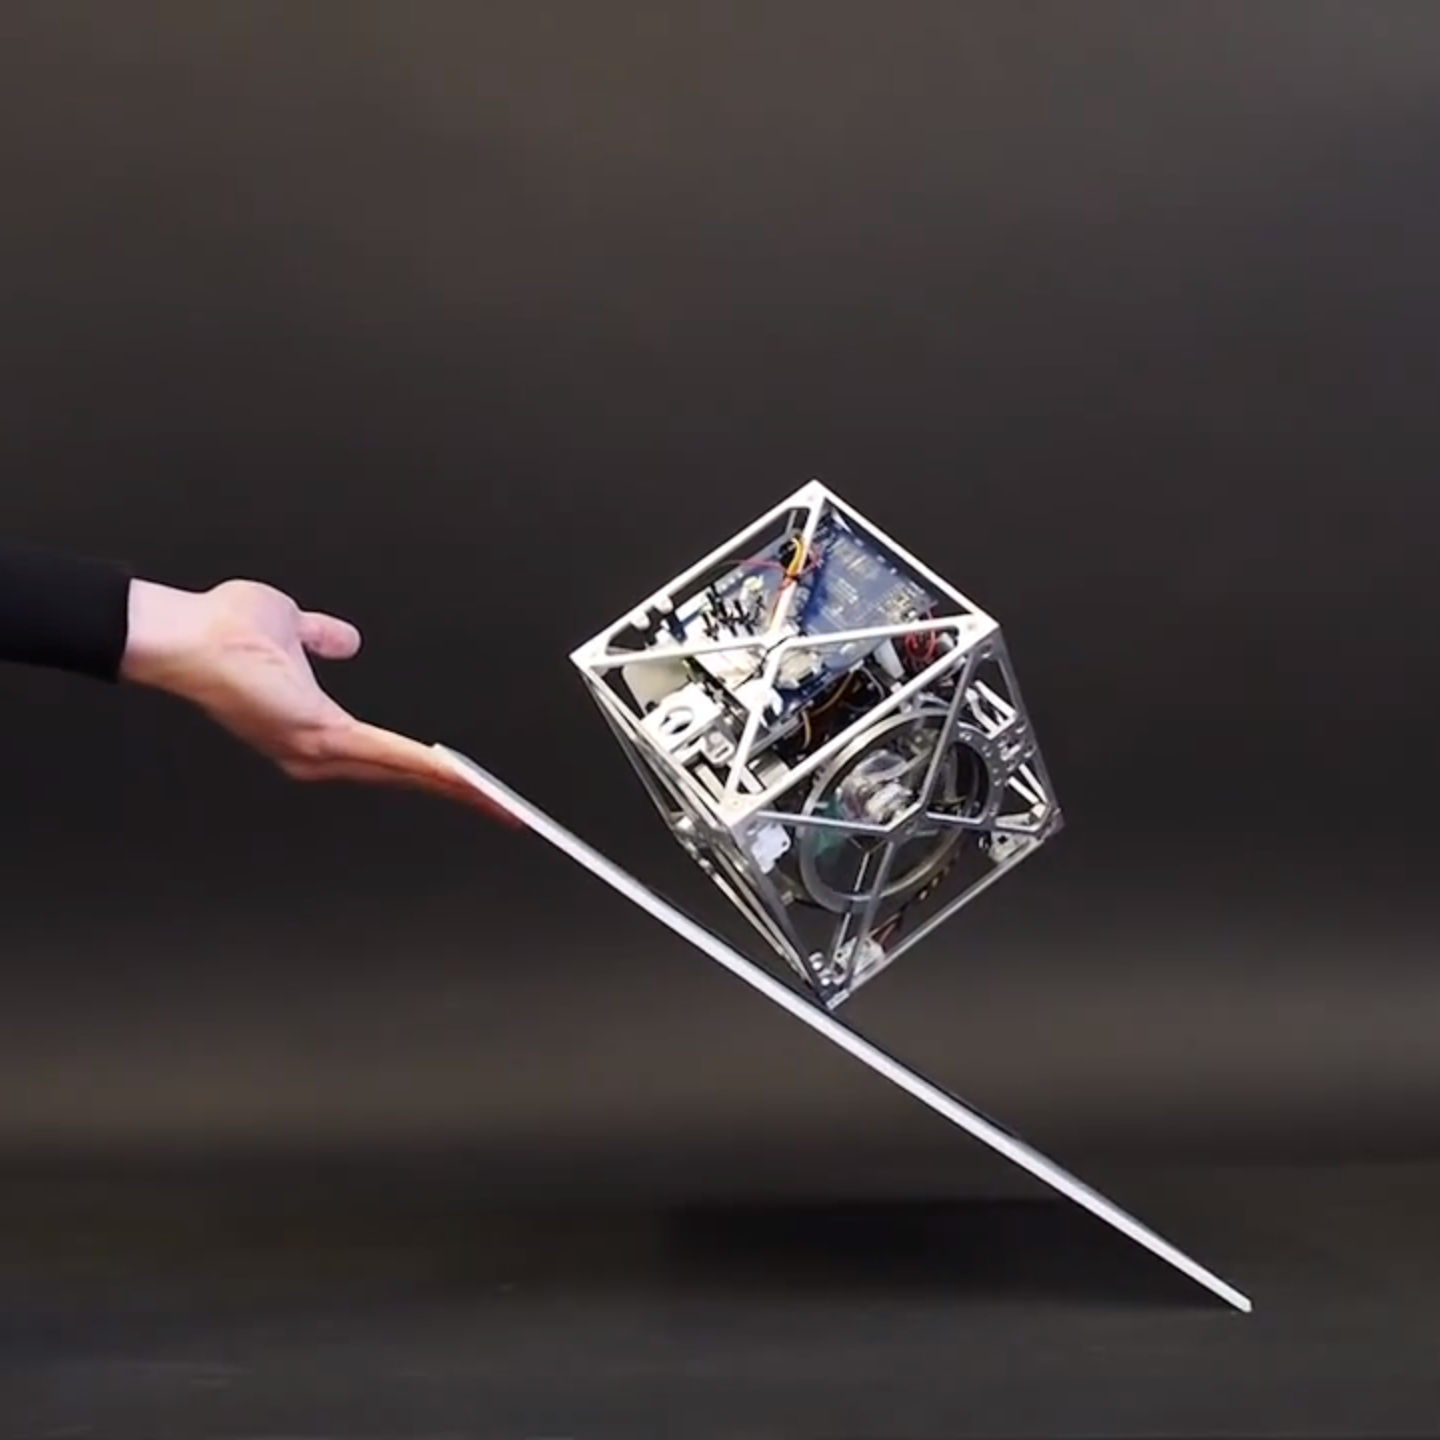 Cubli: The Cube That Can Walk and Jump